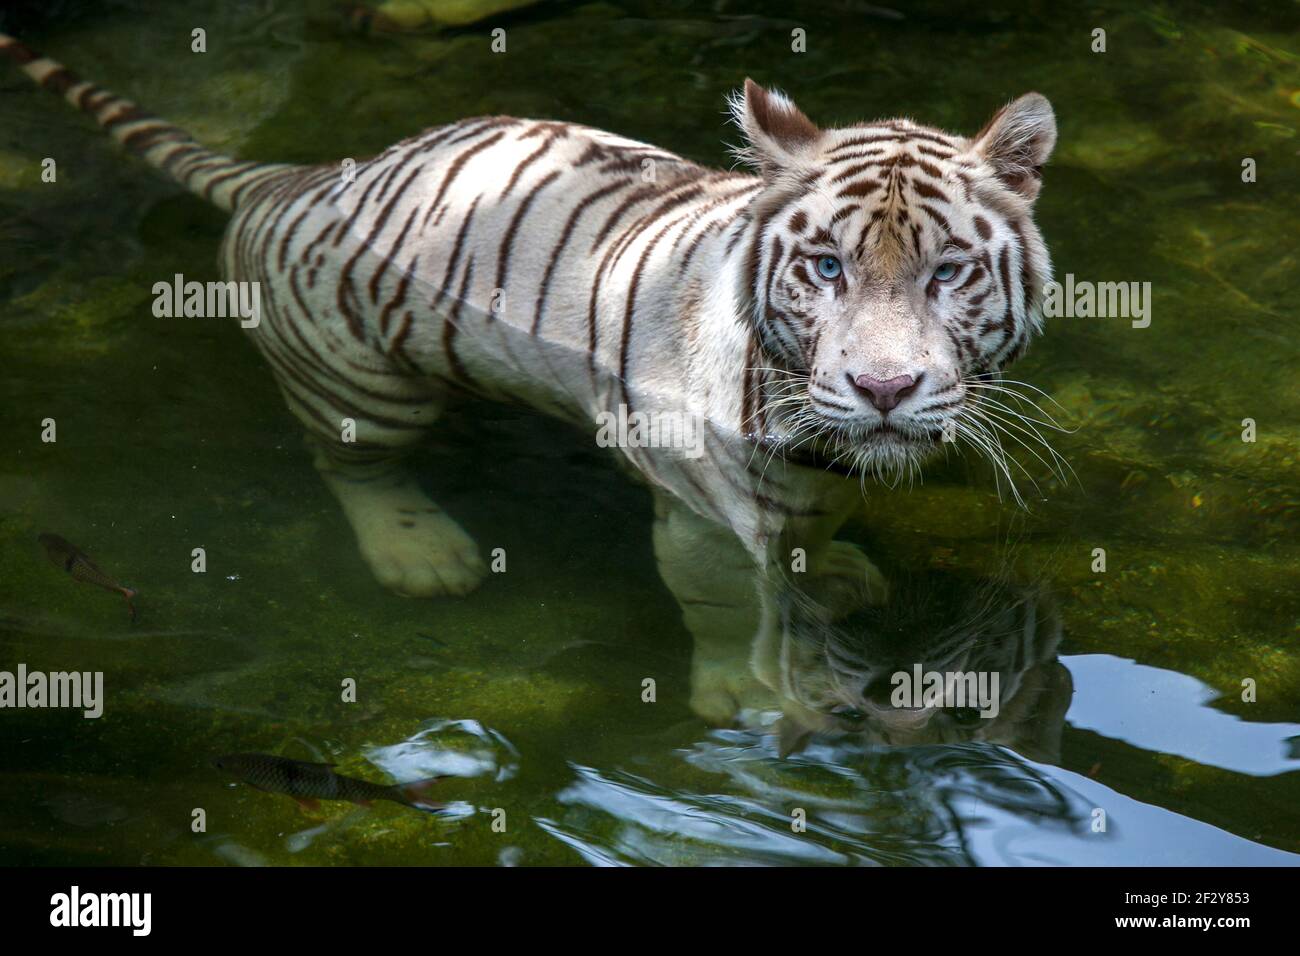 A white tiger at Singapore Zoo swimming in the moat surrounding its enclosure. This tiger is particularly fond of diving into the moat. Stock Photo